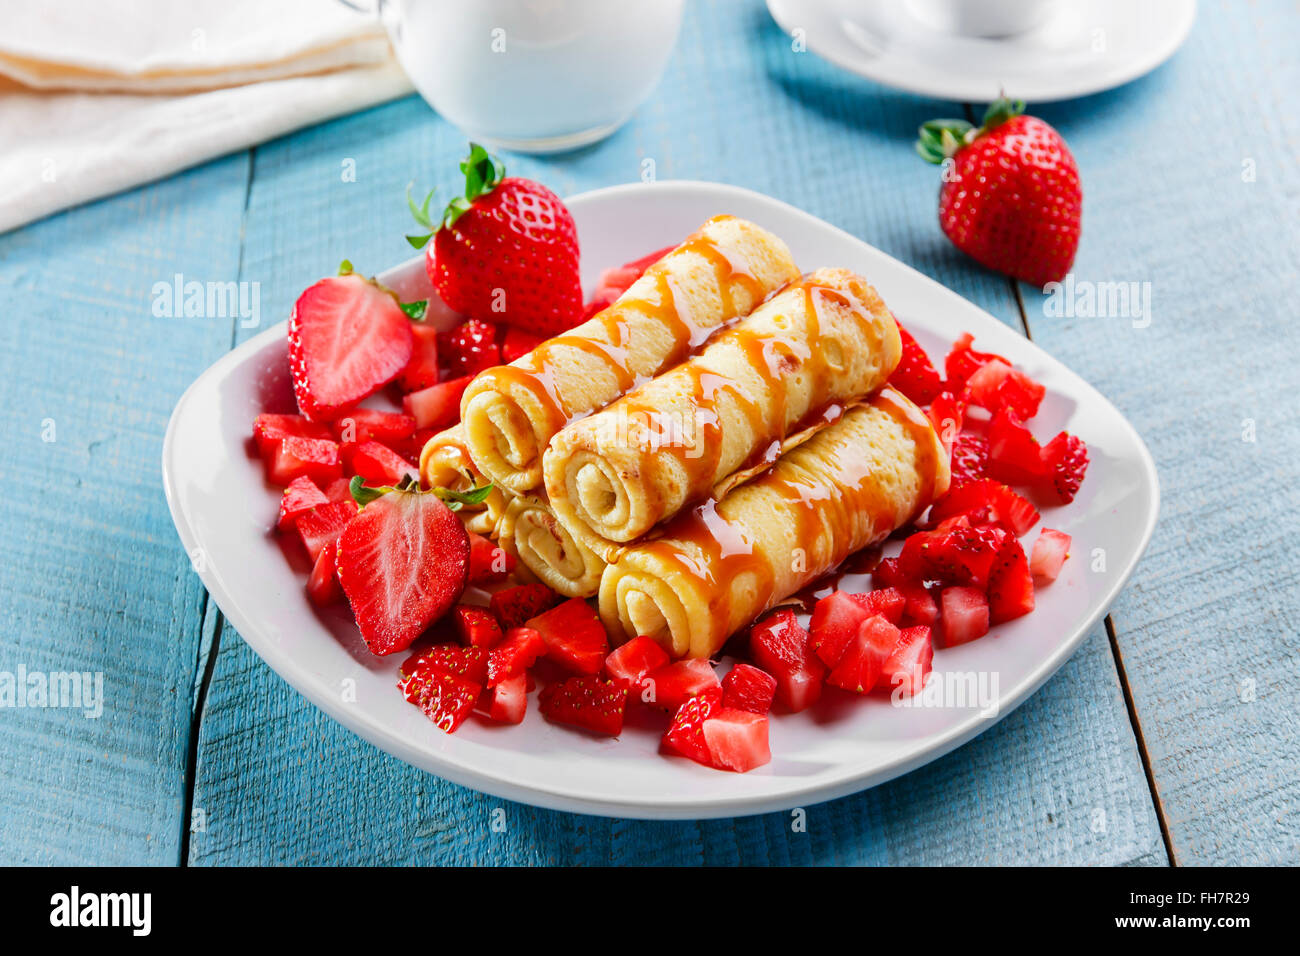 rolled pancakes with strawberries and caramel breakfast Stock Photo